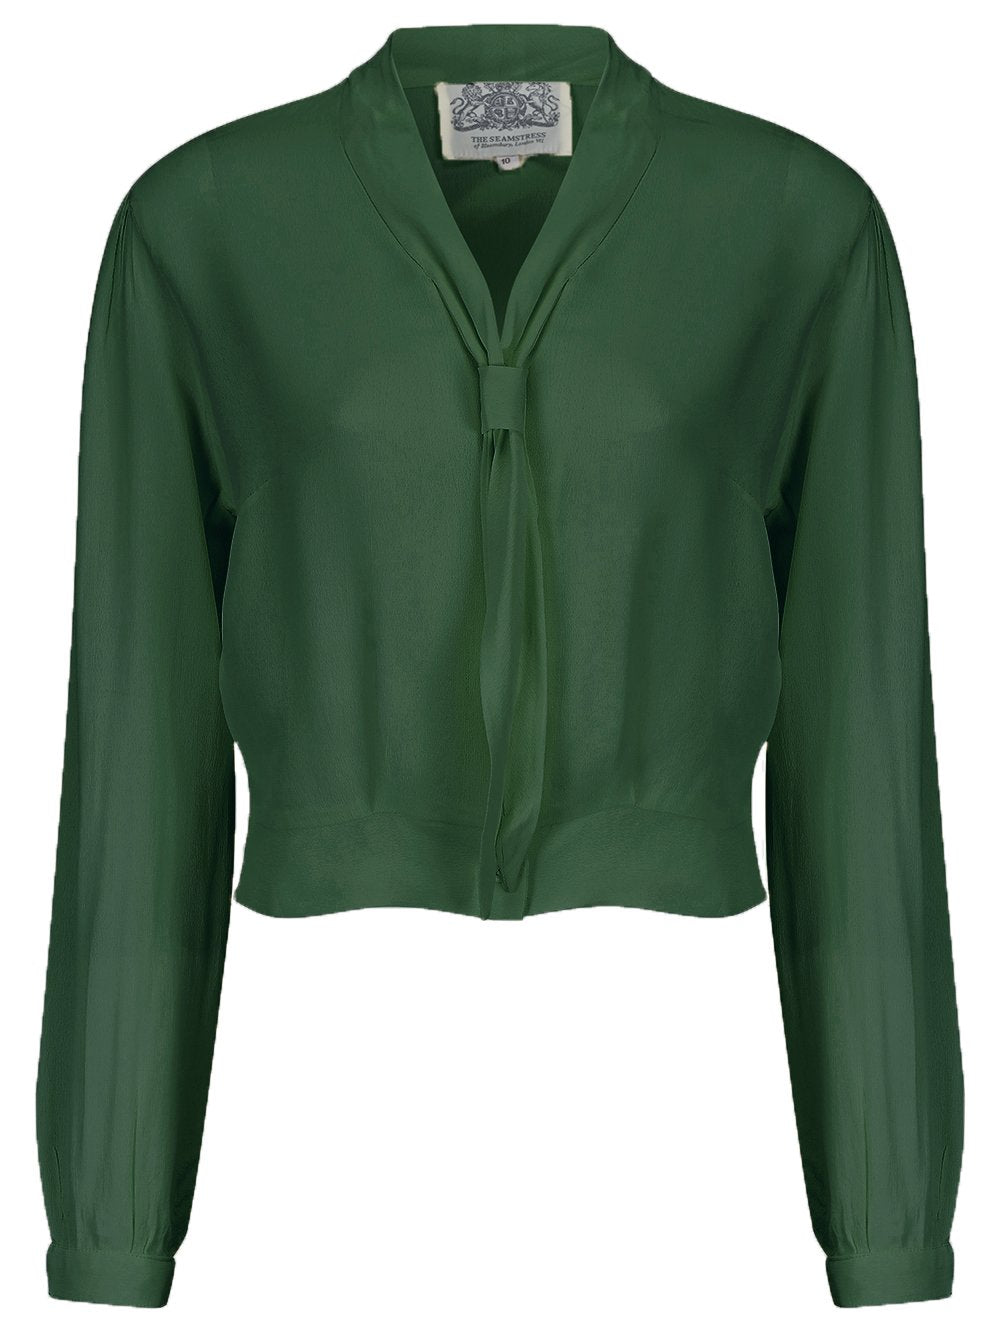 "Bonnie" Long Sleeve Blouse in Vintage Green, Classic 1940s Vintage Inspired Style - True and authentic vintage style clothing, inspired by the Classic styles of CC41 , WW2 and the fun 1950s RocknRoll era, for everyday wear plus events like Goodwood Revival, Twinwood Festival and Viva Las Vegas Rockabilly Weekend Rock n Romance The Seamstress Of Bloomsbury